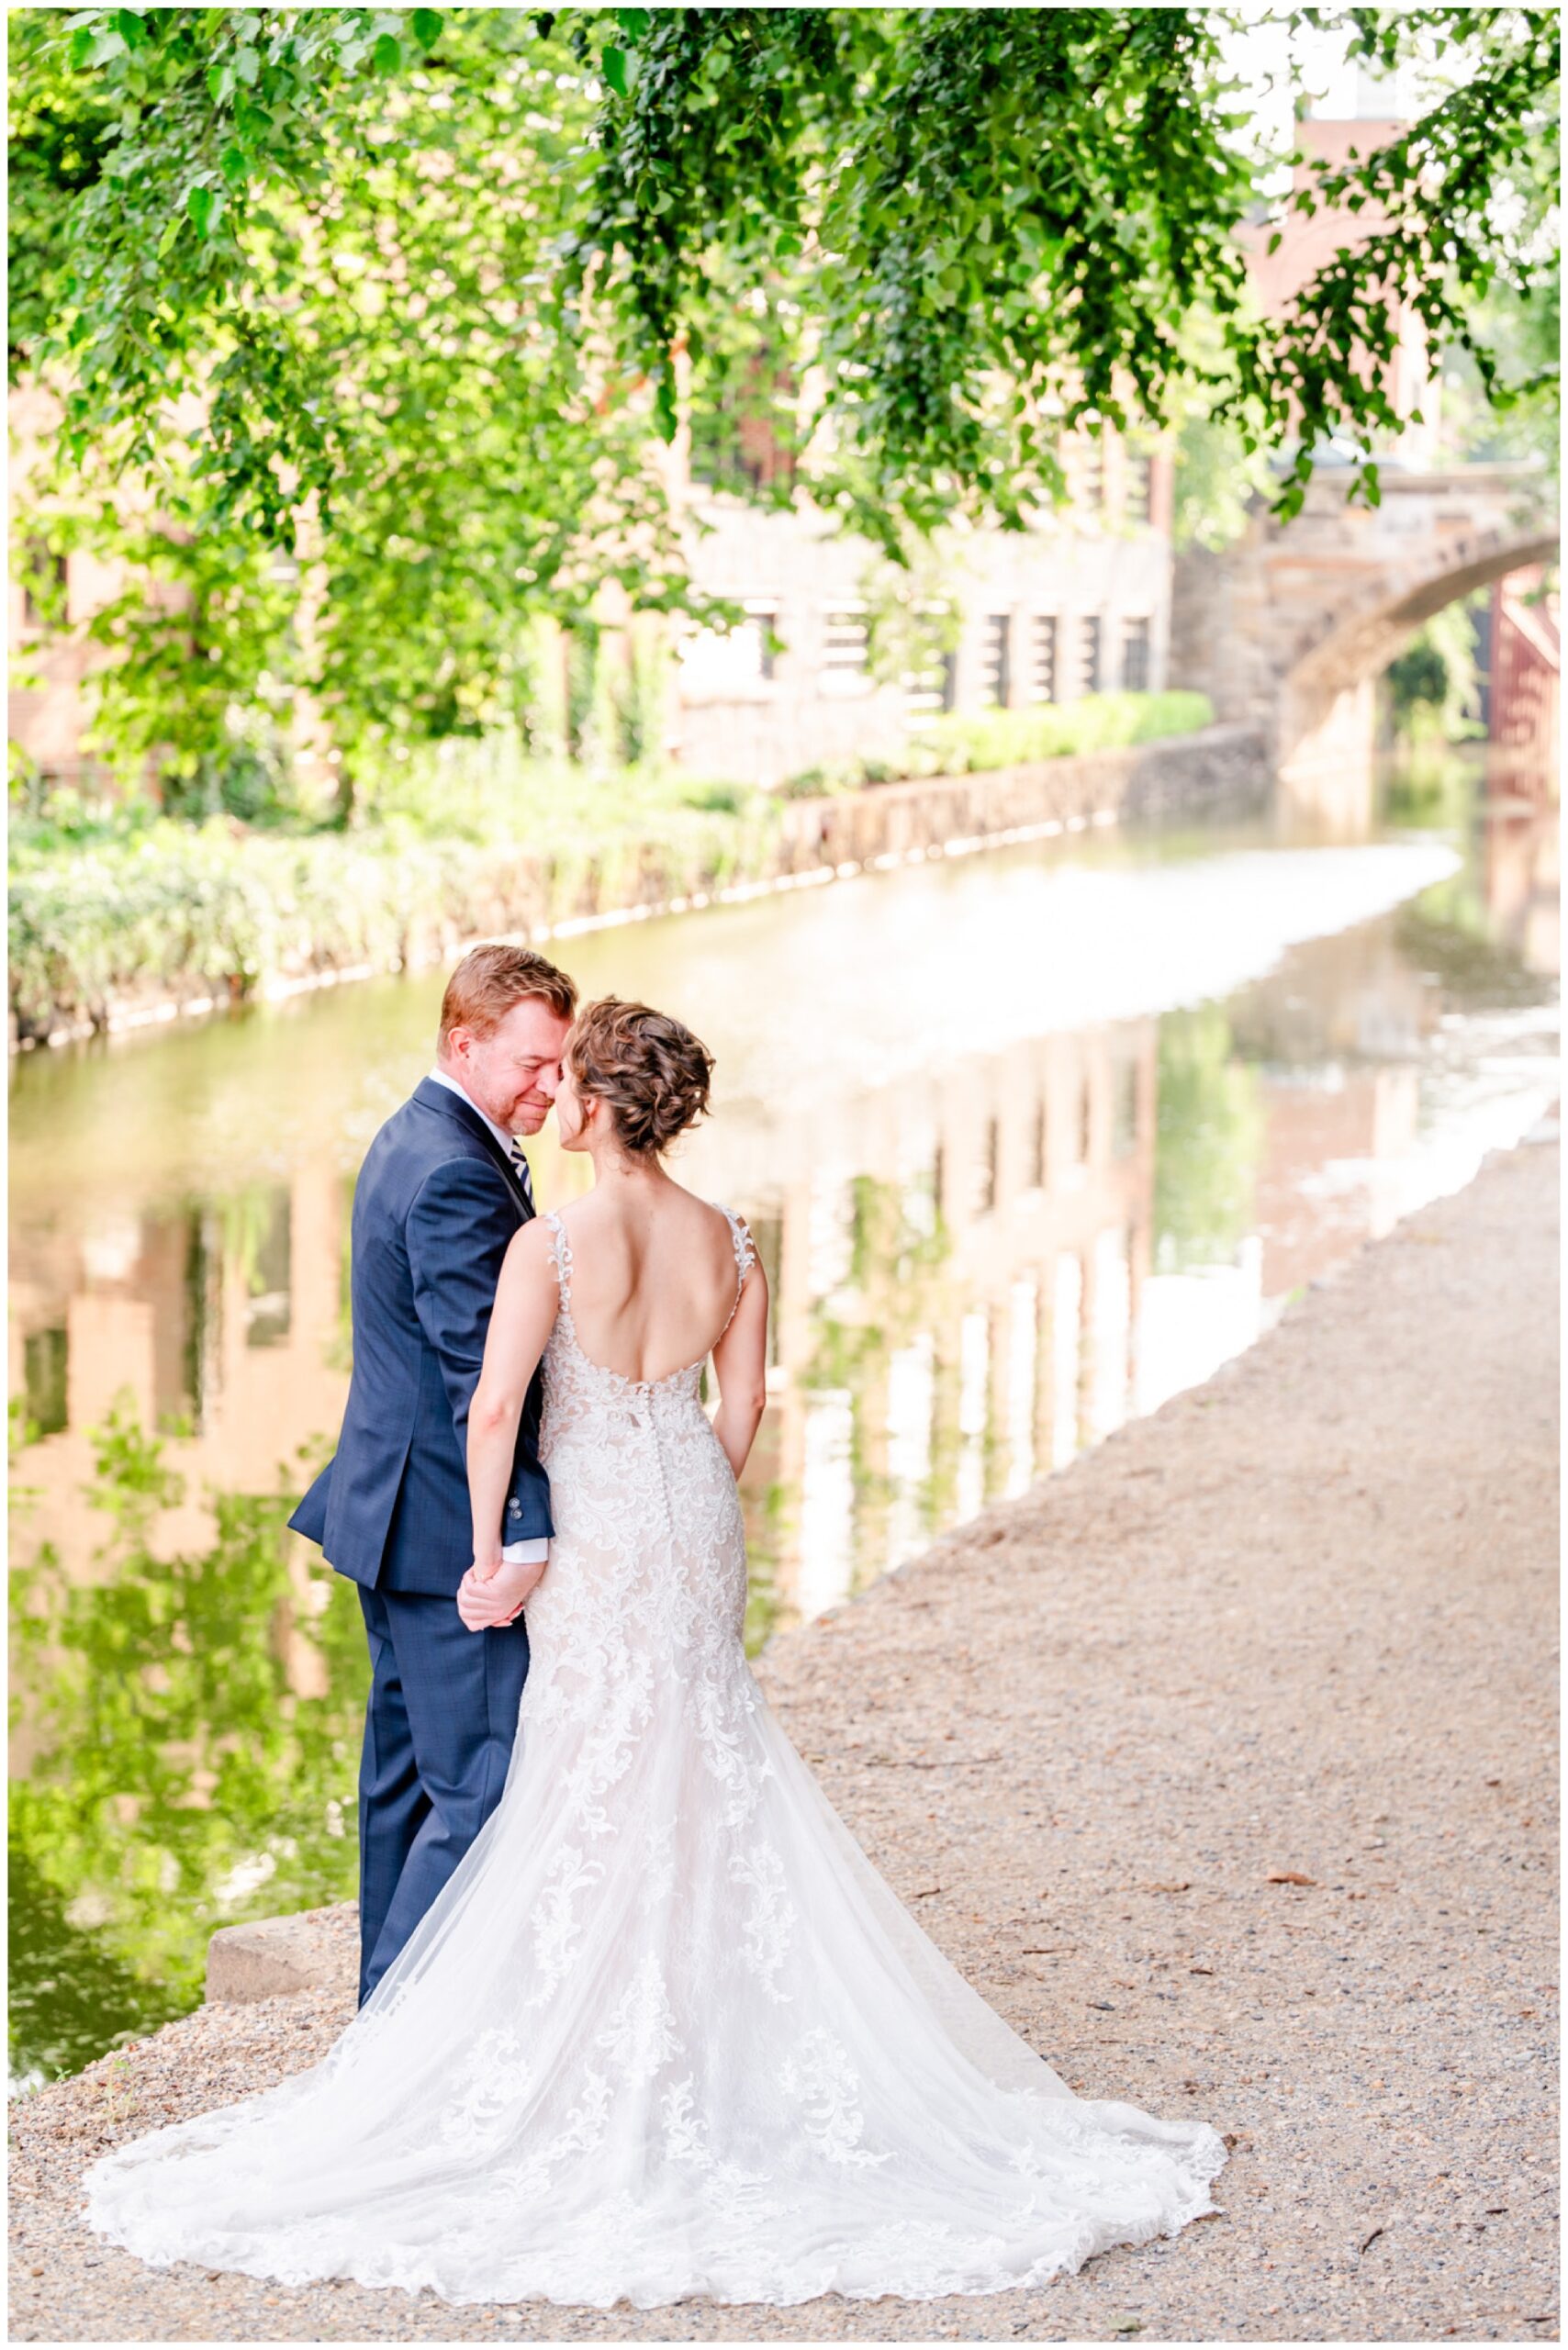 romantic Ritz Carlton Georgetown wedding, summer wedding aesthetic, green and white aesthetic, summer D.C. wedding, D.C. wedding venues, Ritz Carlton wedding, Washington D.C. wedding, romantic wedding aesthetic, Georgetown wedding, Rachel E.H. Photography, D.C. photographer, couple laughing together, backless wedding dress, couple in front of canal